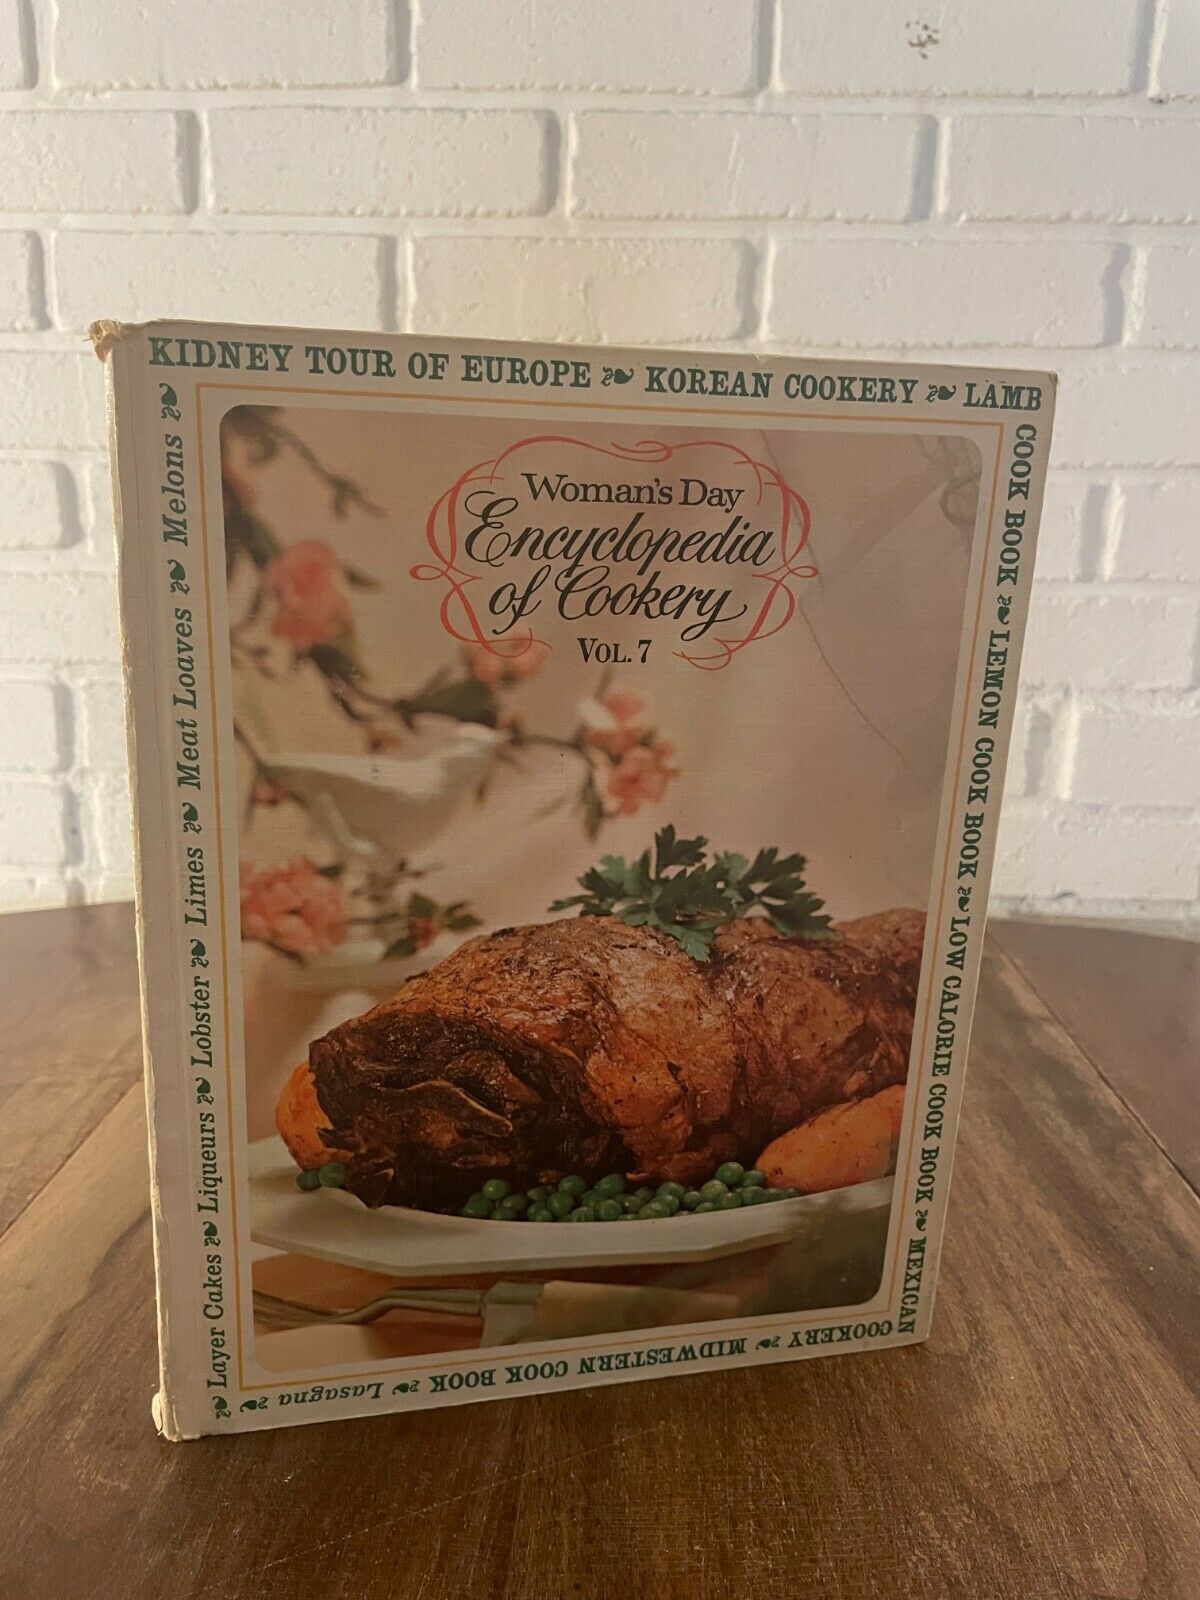 Woman's Day Encyclopedia of Cookery (Vol. 7 - Kid-Moc) 1966 Hardcover